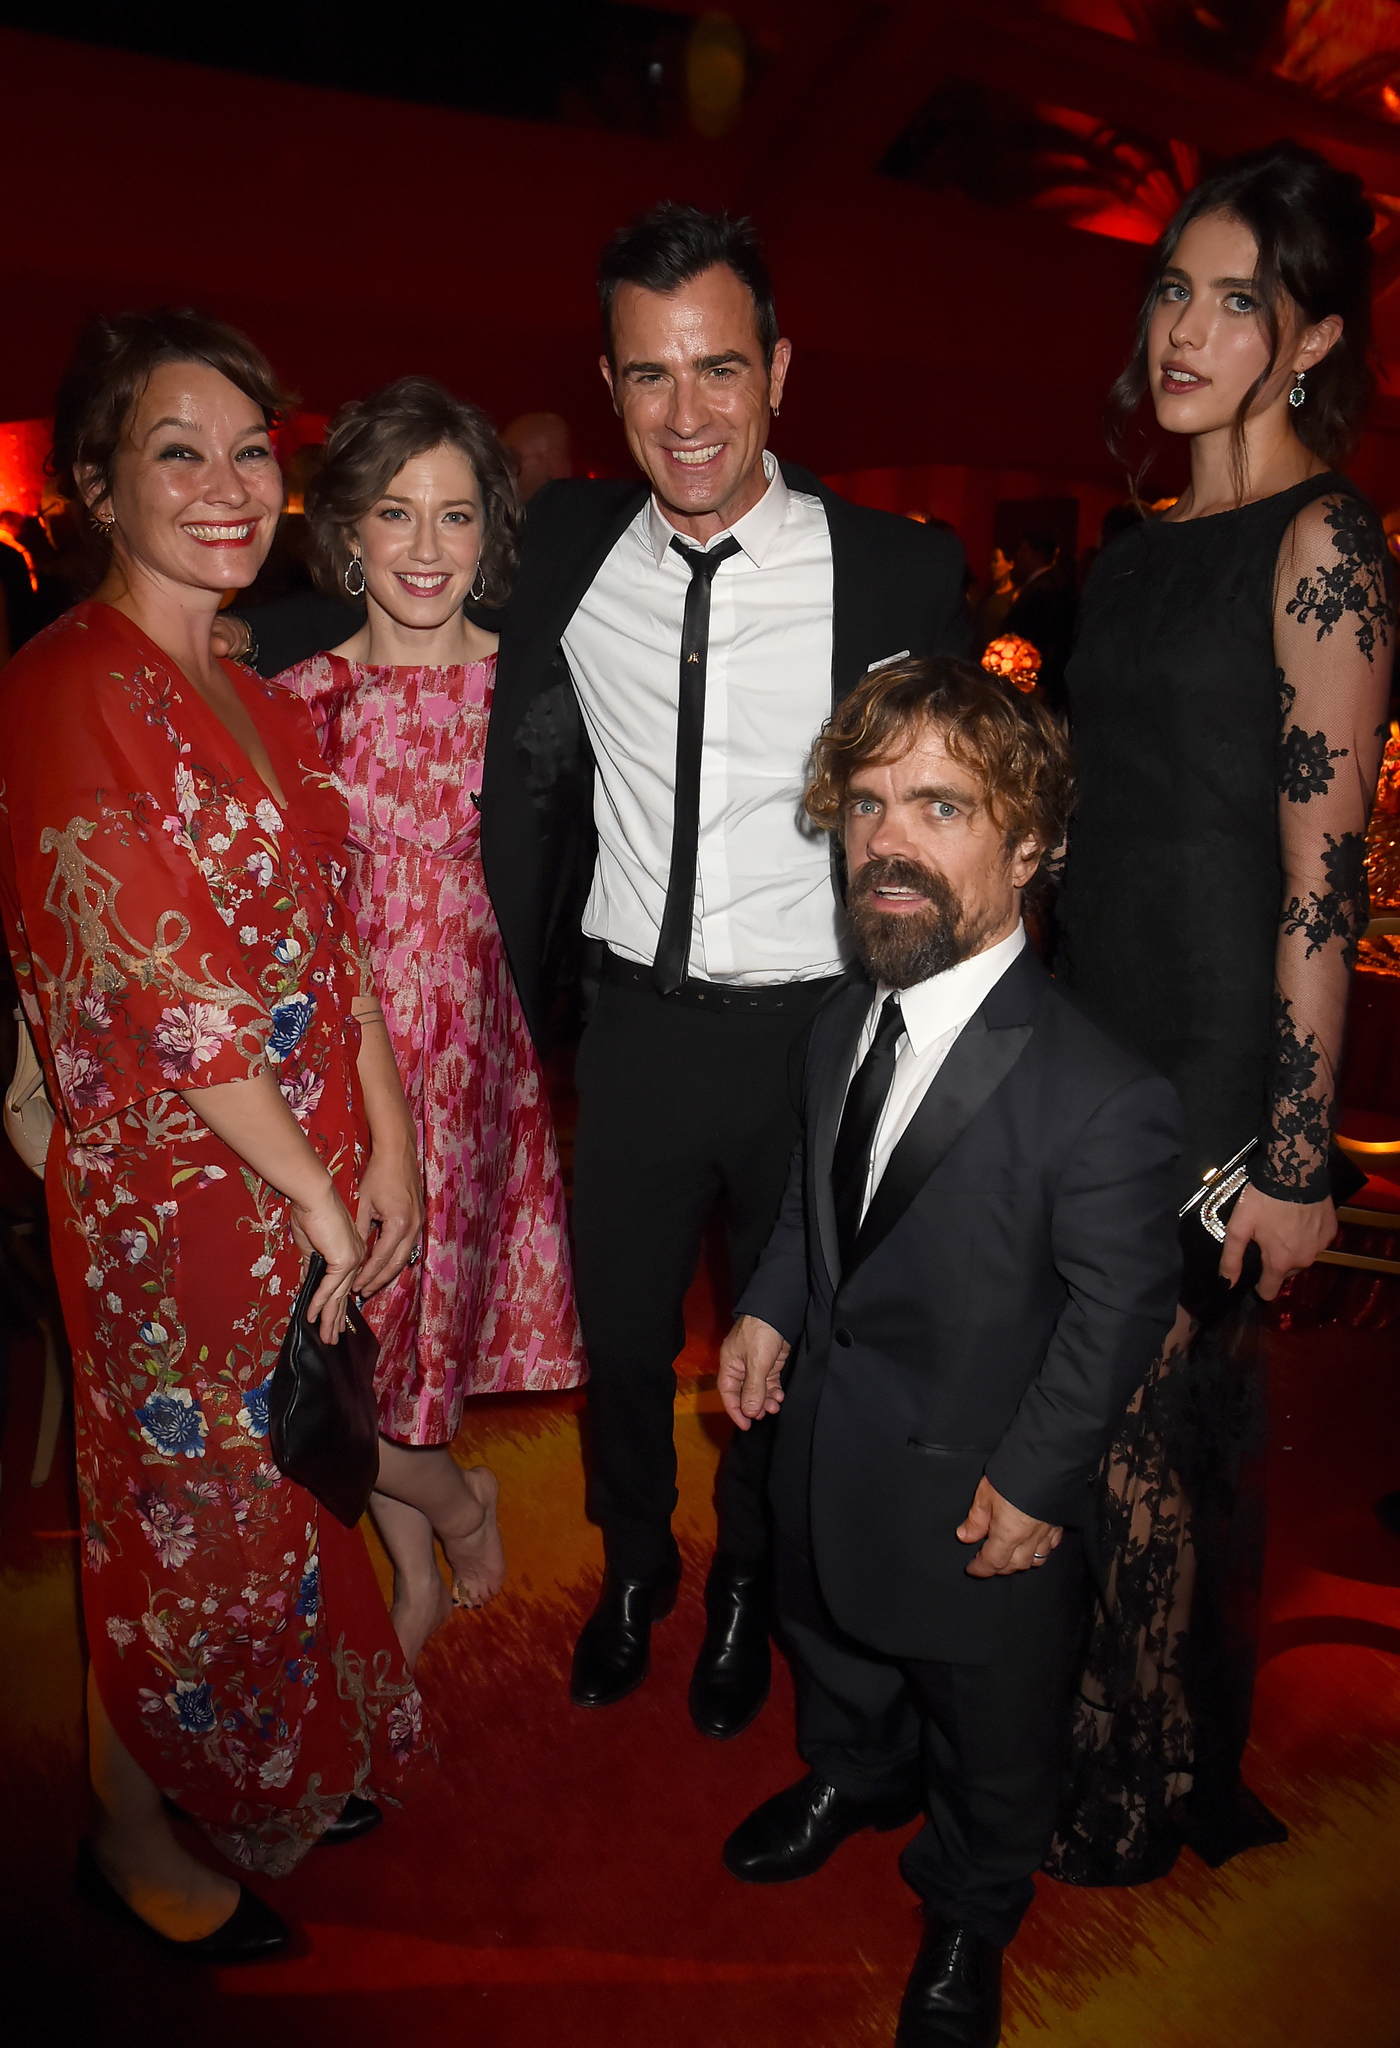 Peter Dinklage, Justin Theroux, Erica Schmidt, Carrie Coon and Margaret Qualley at event of The 67th Primetime Emmy Awards (2015)